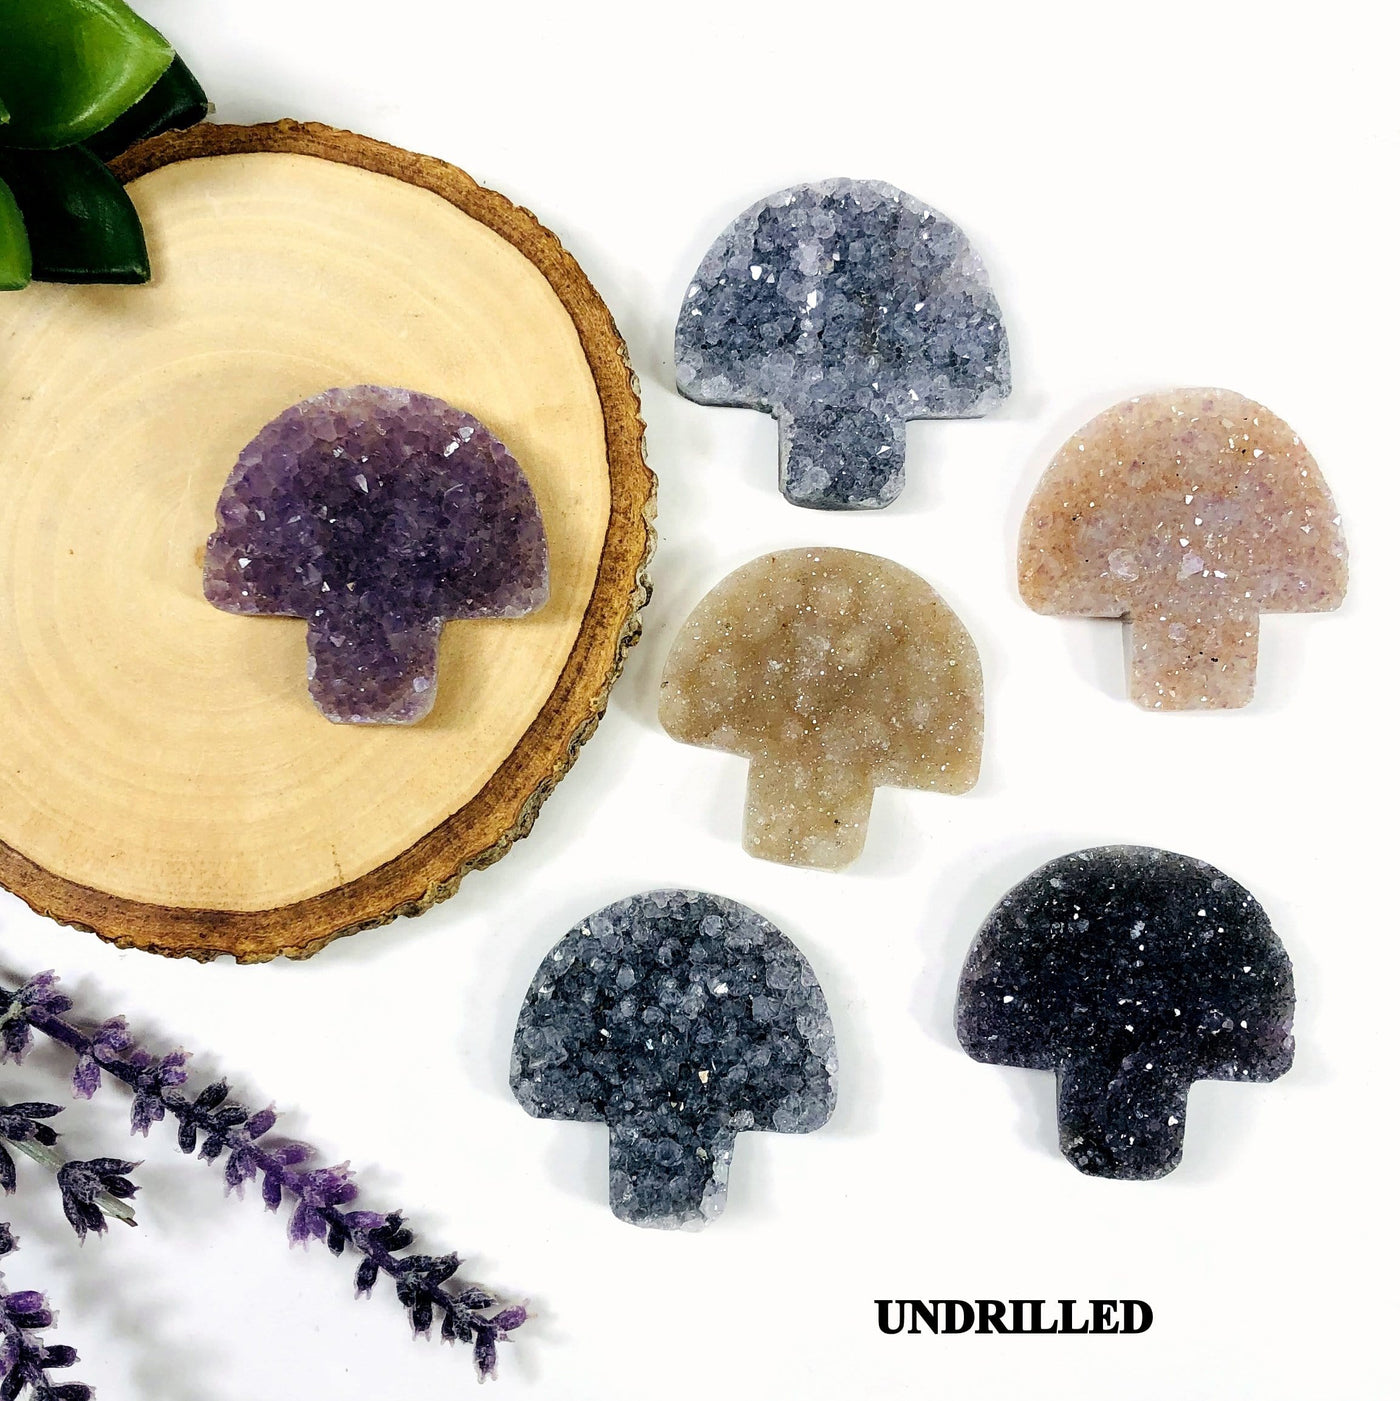 6 undrilled druzy mushroom cabochons with decorations in the background